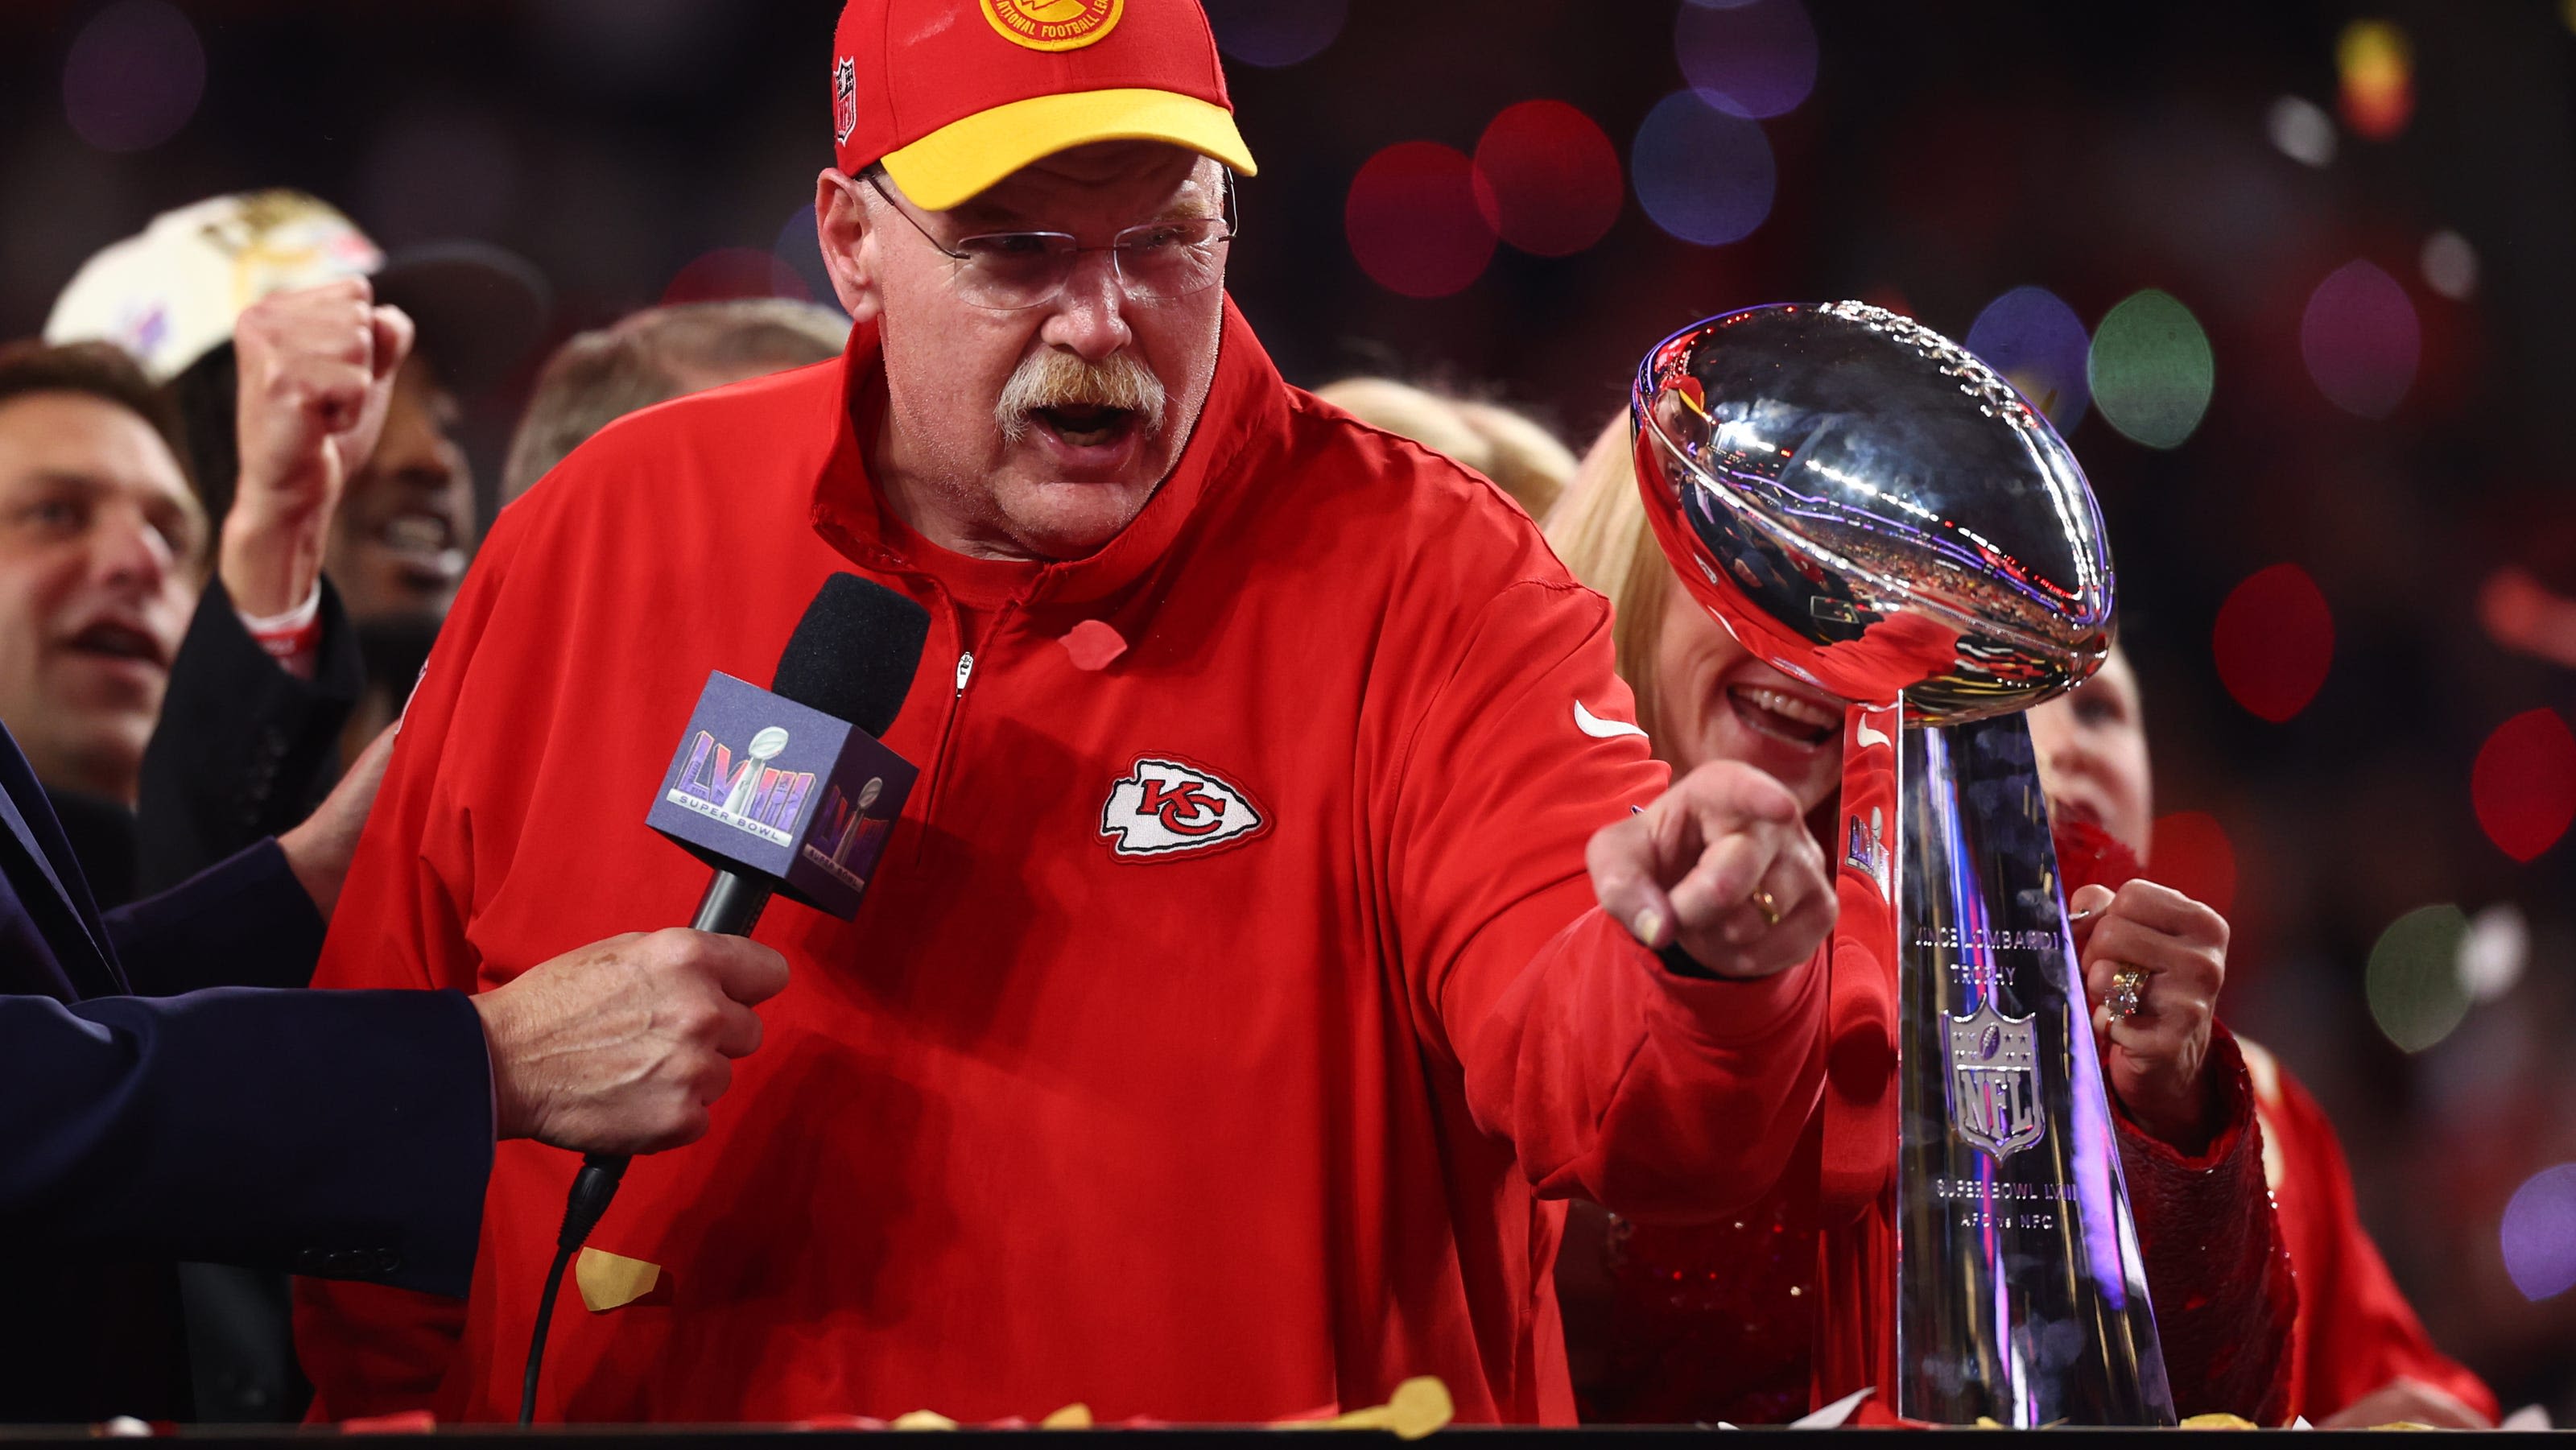 No evidence Andy Reid vowed to leave Chiefs if team boots Butker. That's satire | Fact check